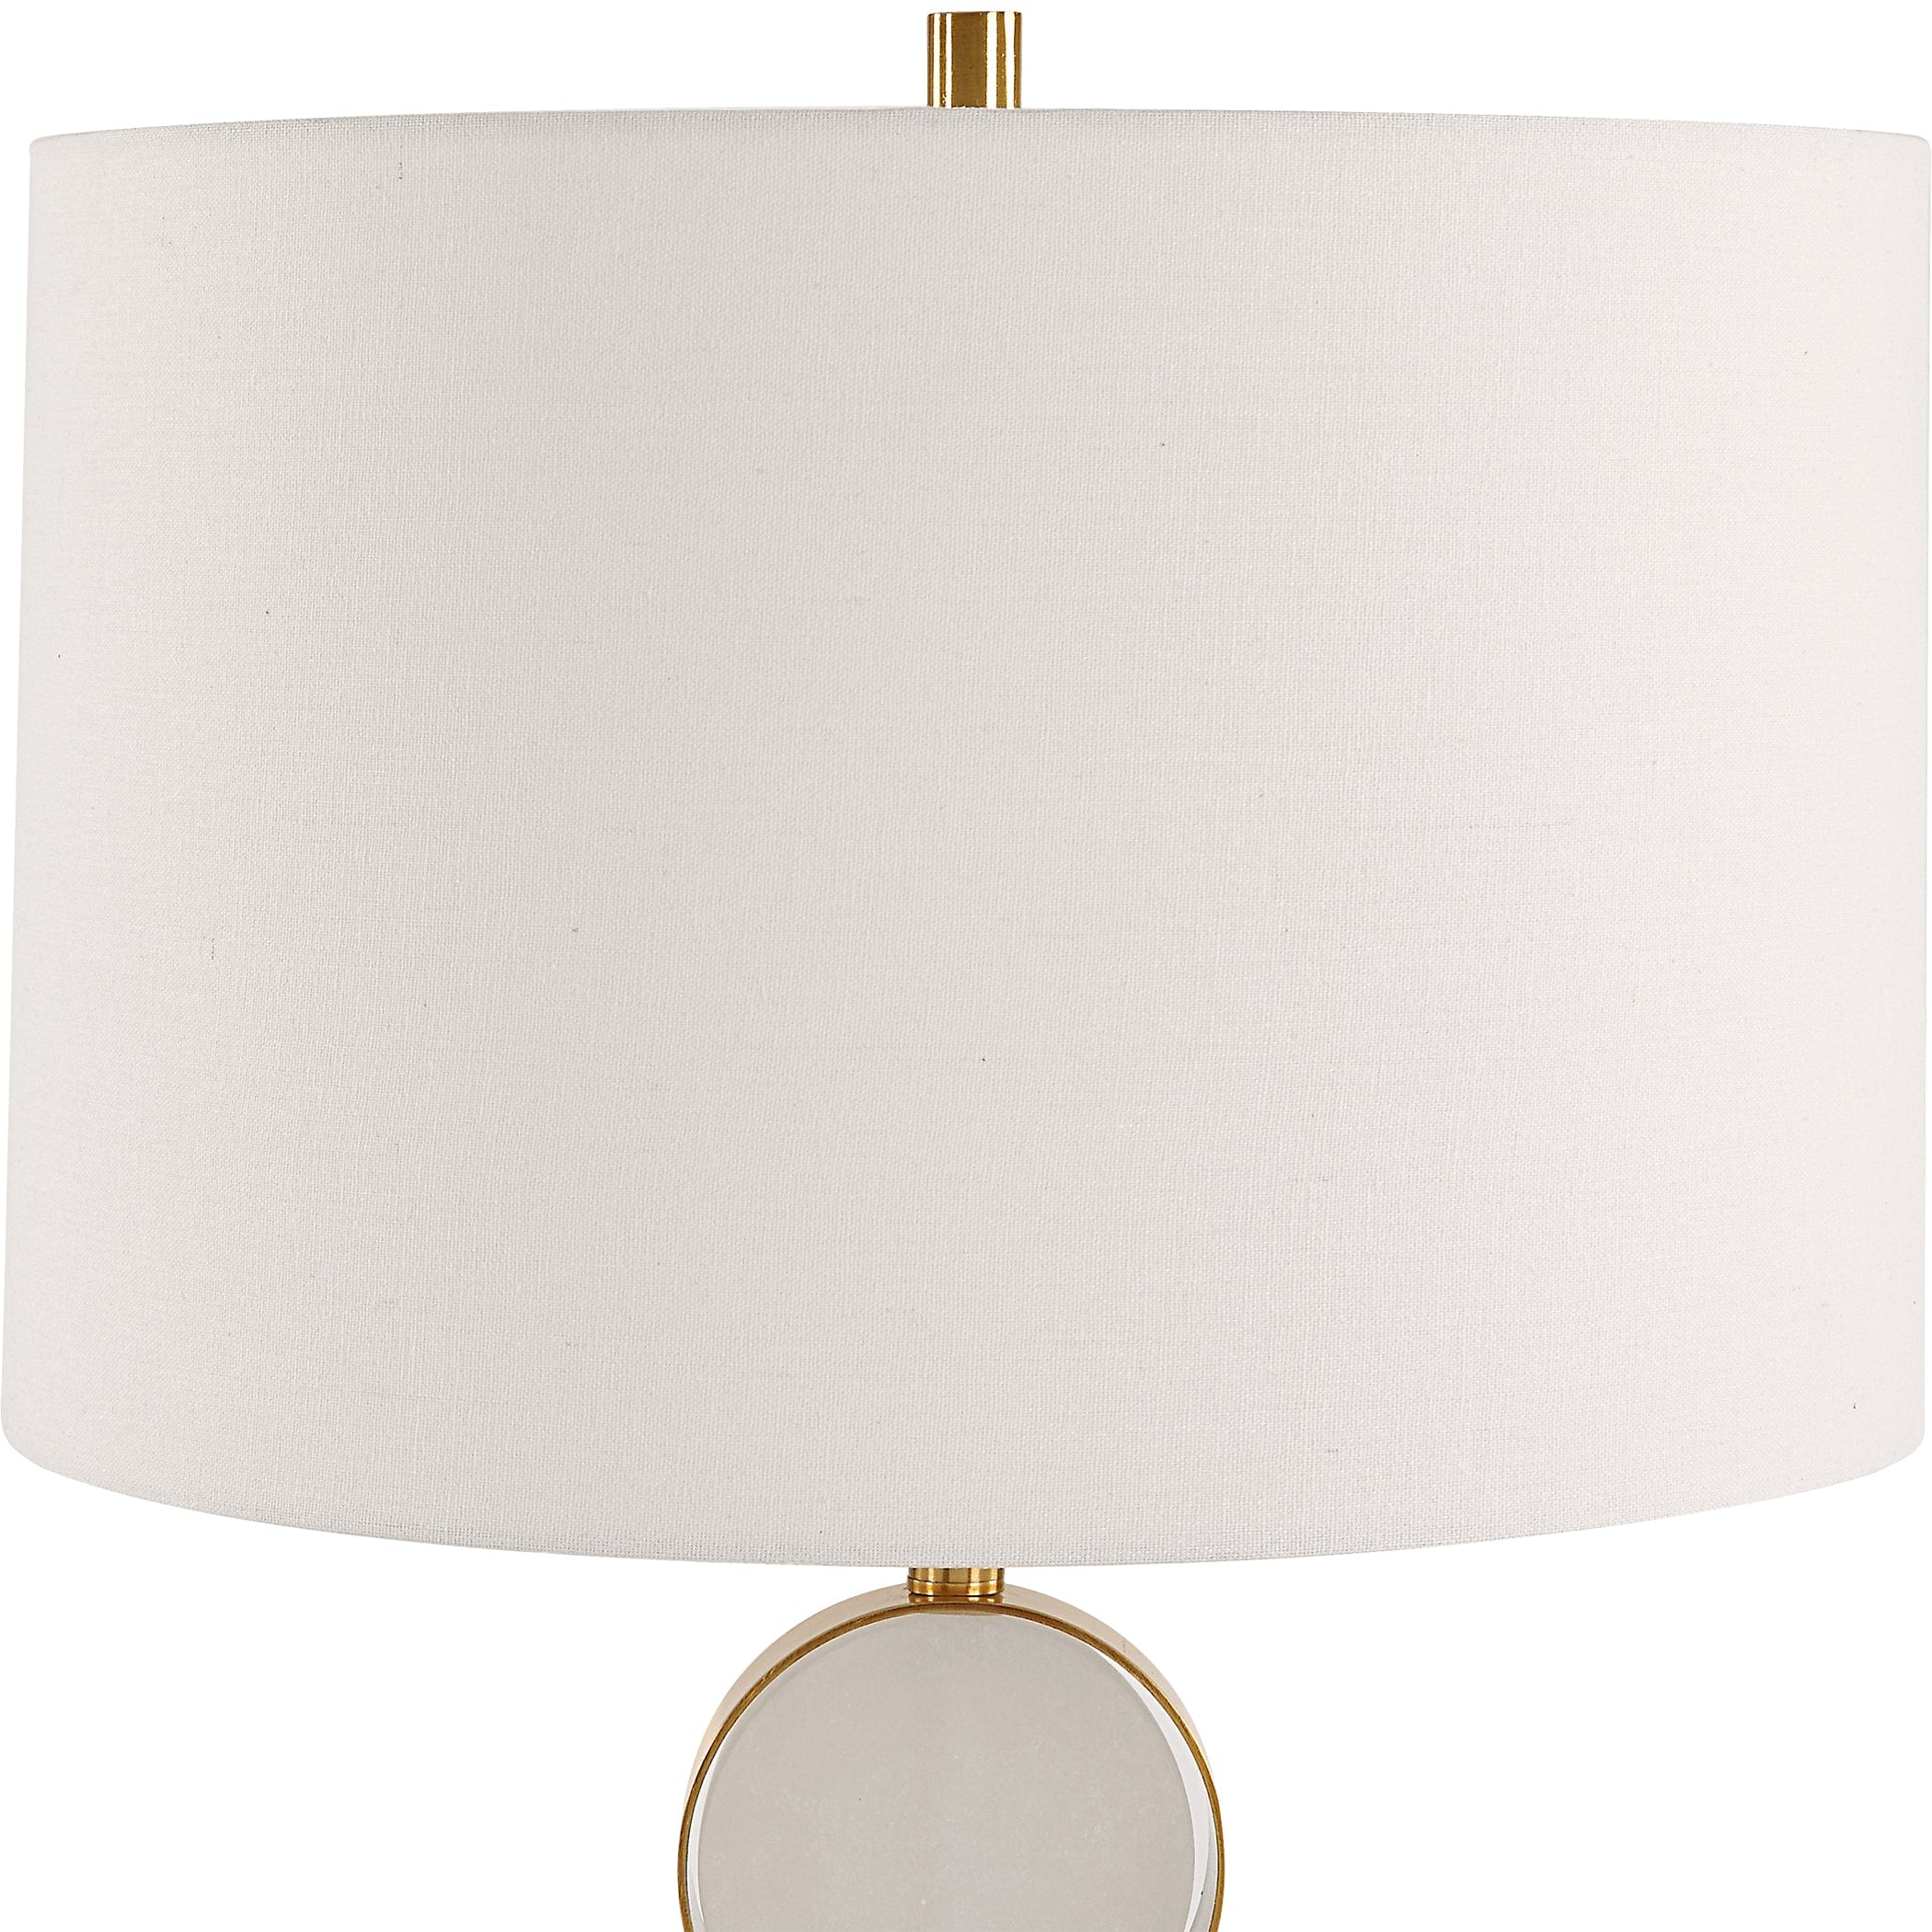 Three Rings Contemporary Table Lamp Uttermost